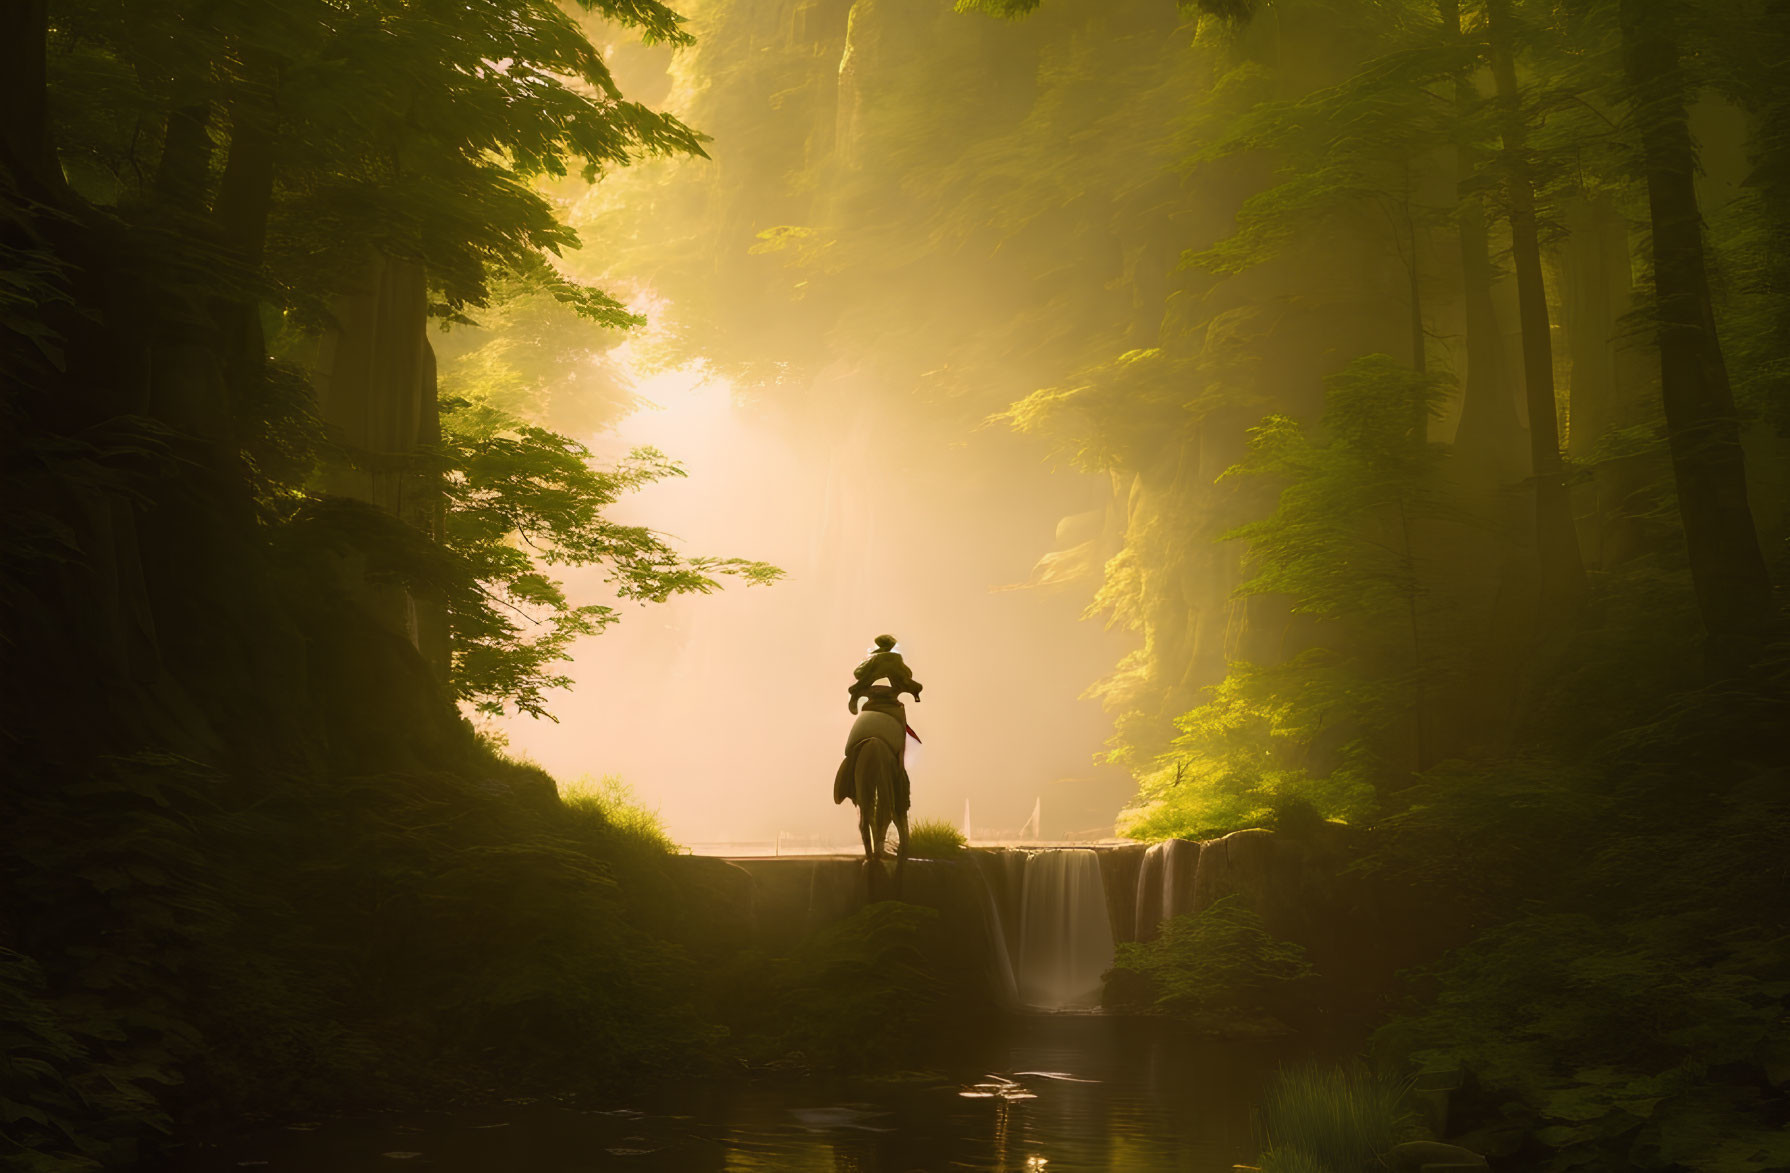 Tranquil forest scene with horse and rider silhouette near sunlit waterfall